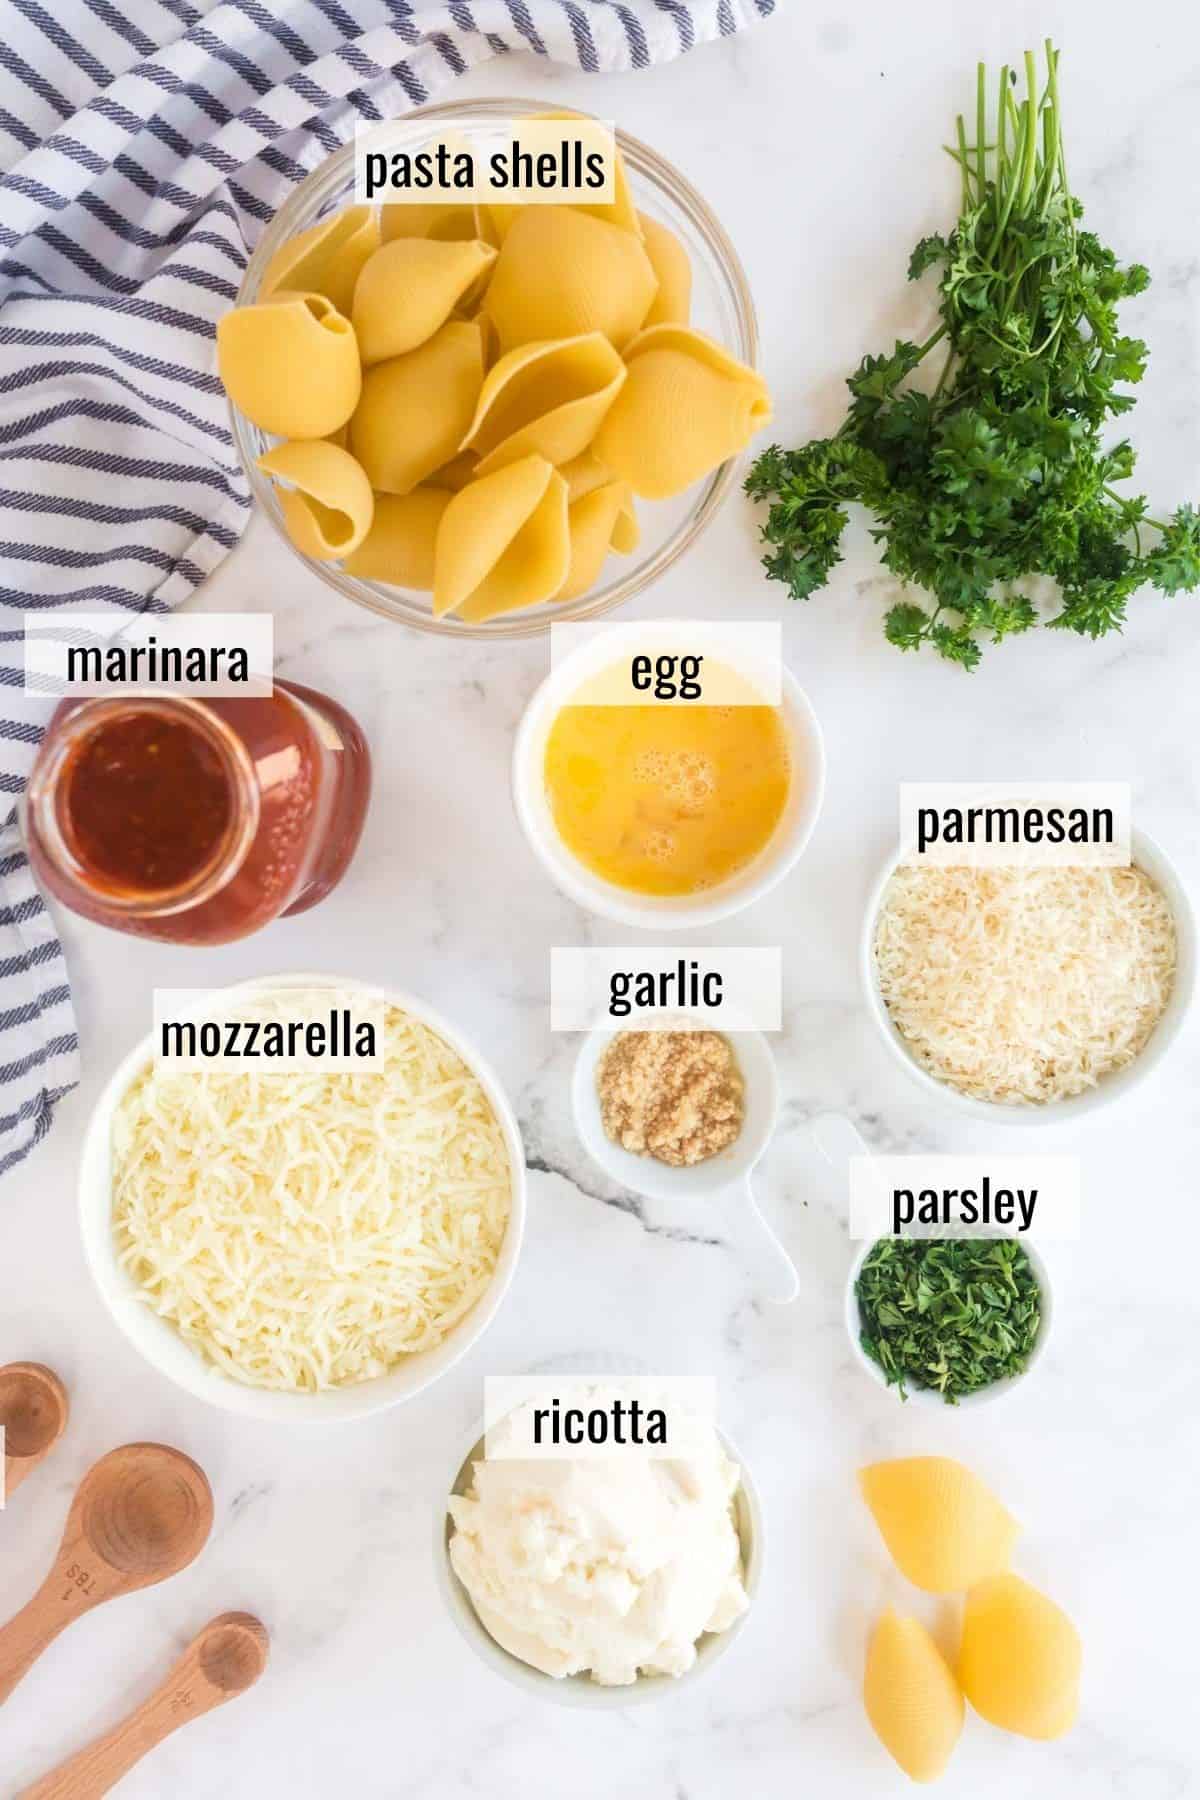 stuffed shells ingredients laid out and labeled